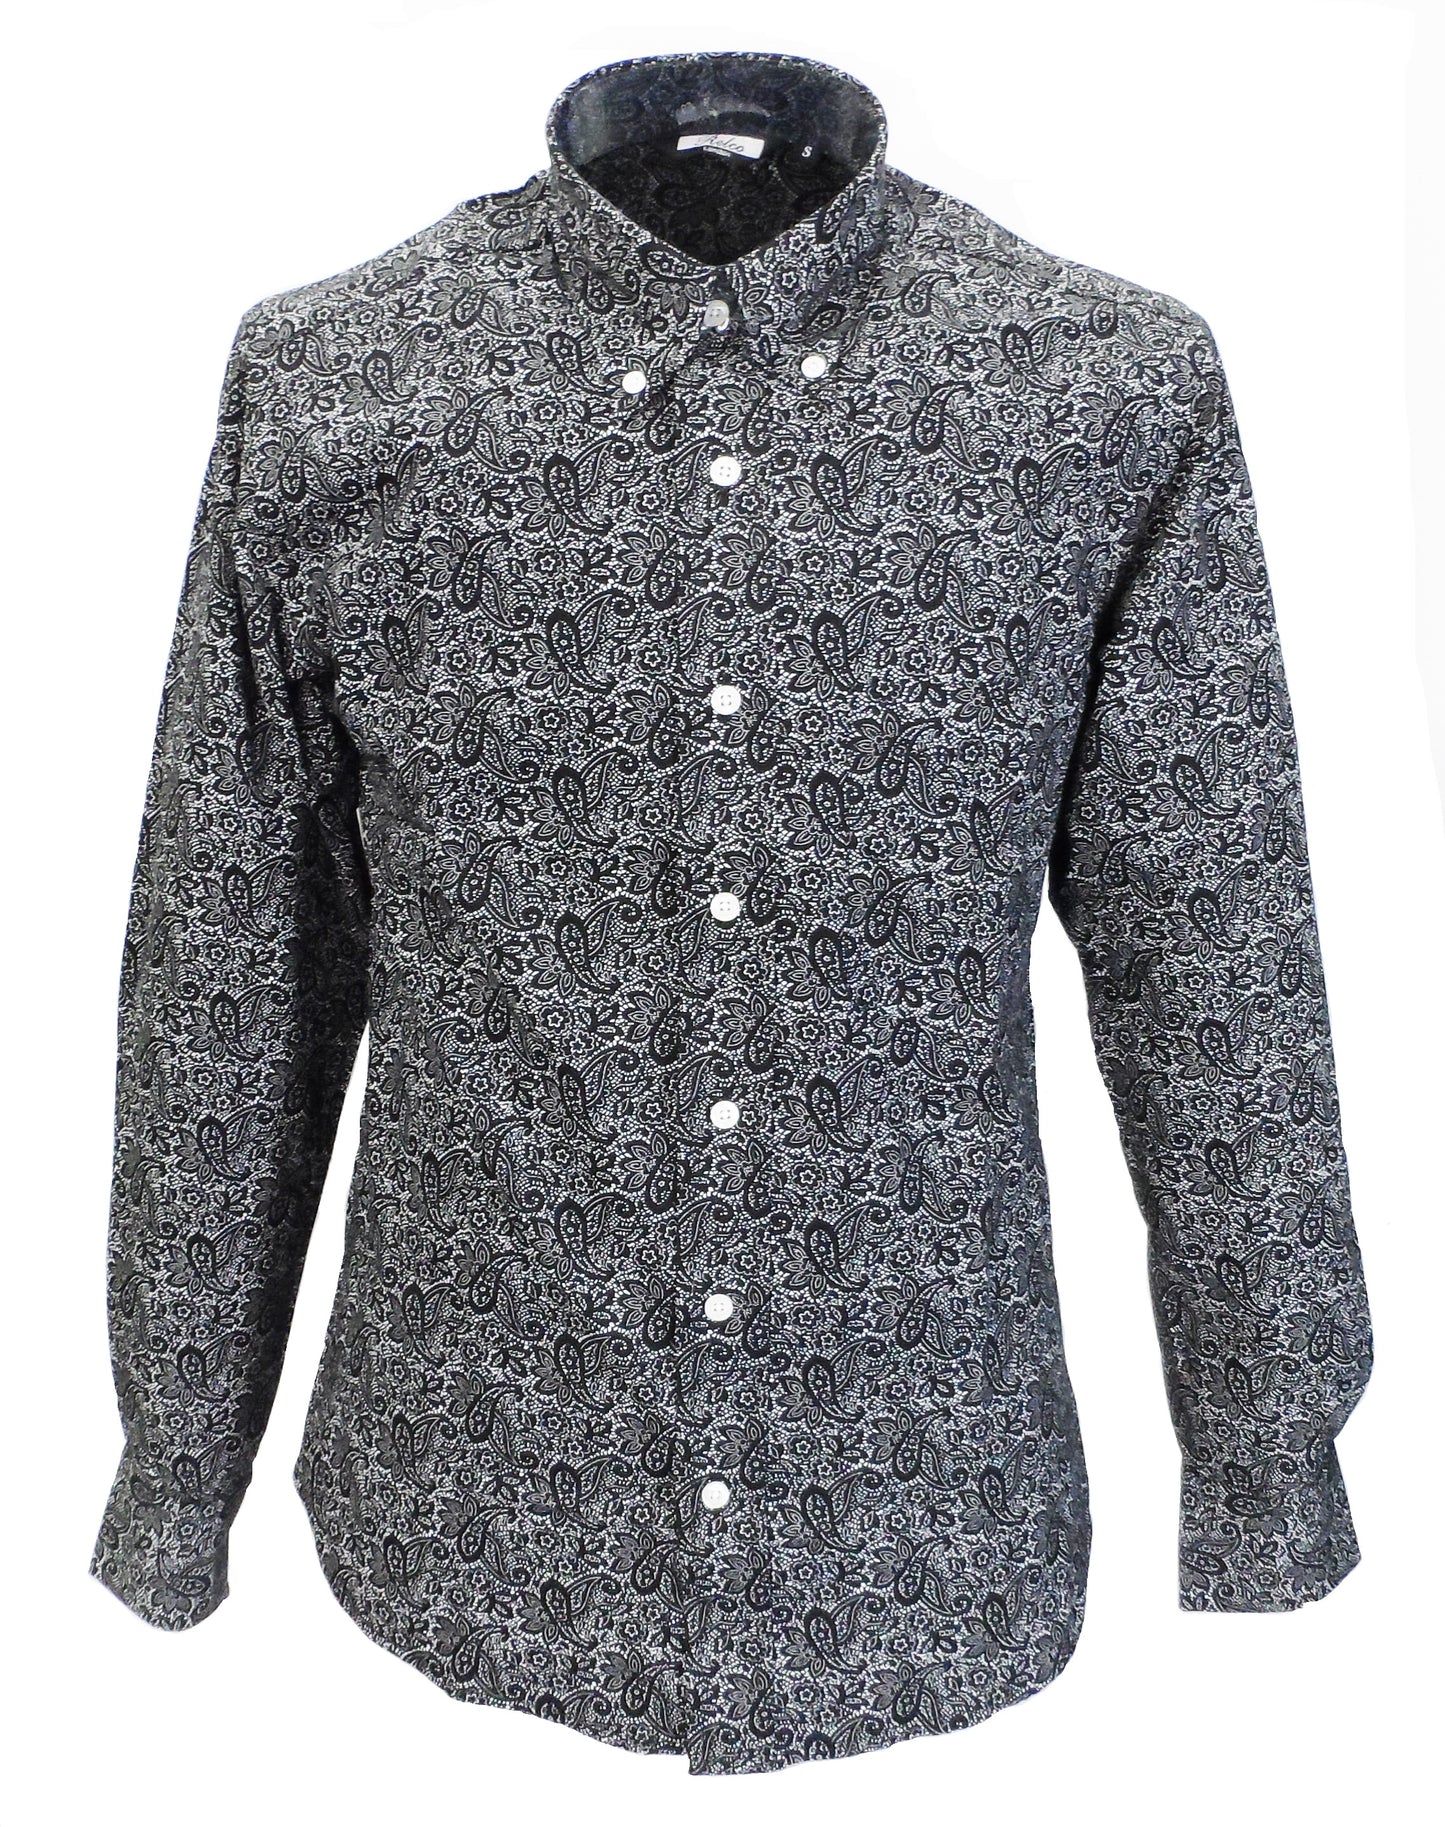 Relco Black Paisley Cotton Long Sleeved Retro Mod Button Down Shirts